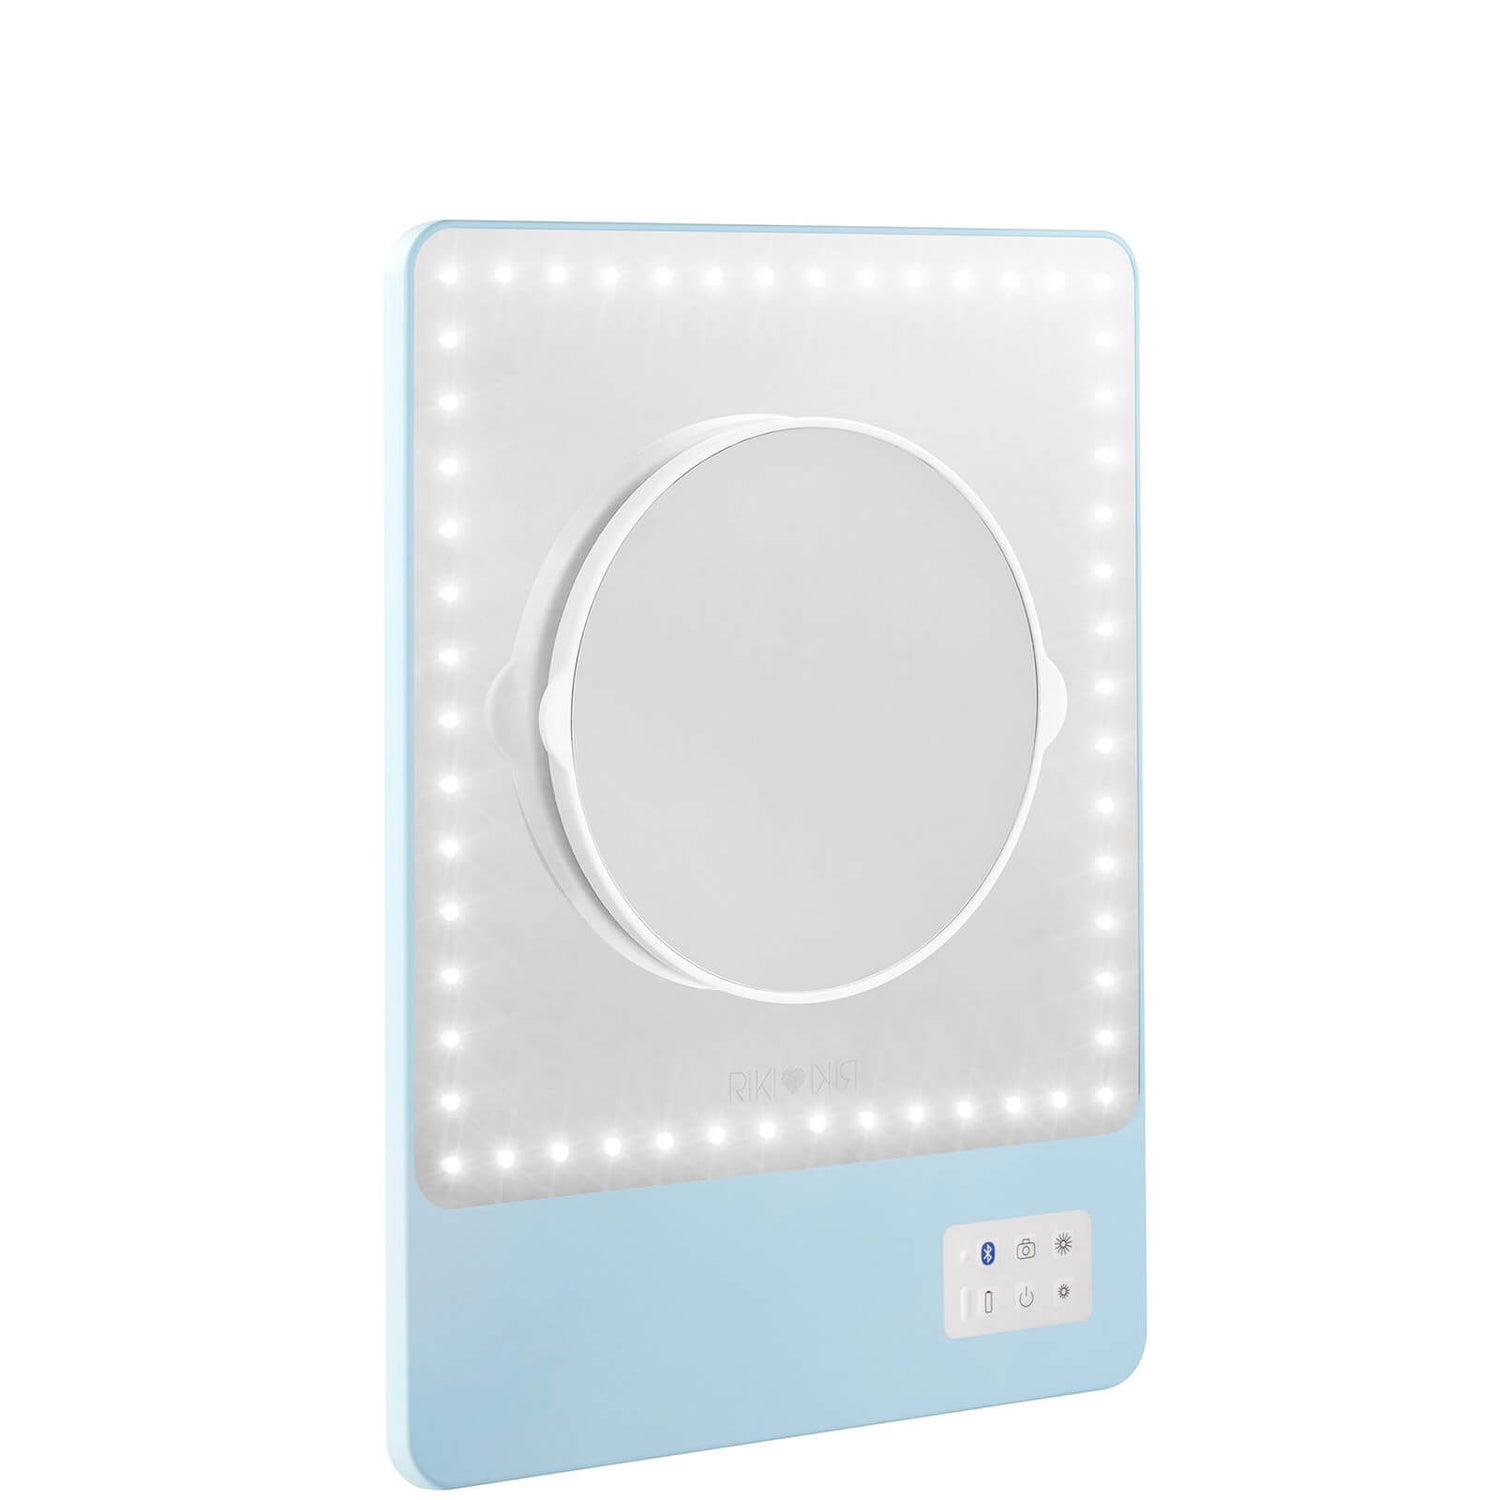 GLAMCOR Limited Edition Up in the Clouds Riki Skinny Mirror